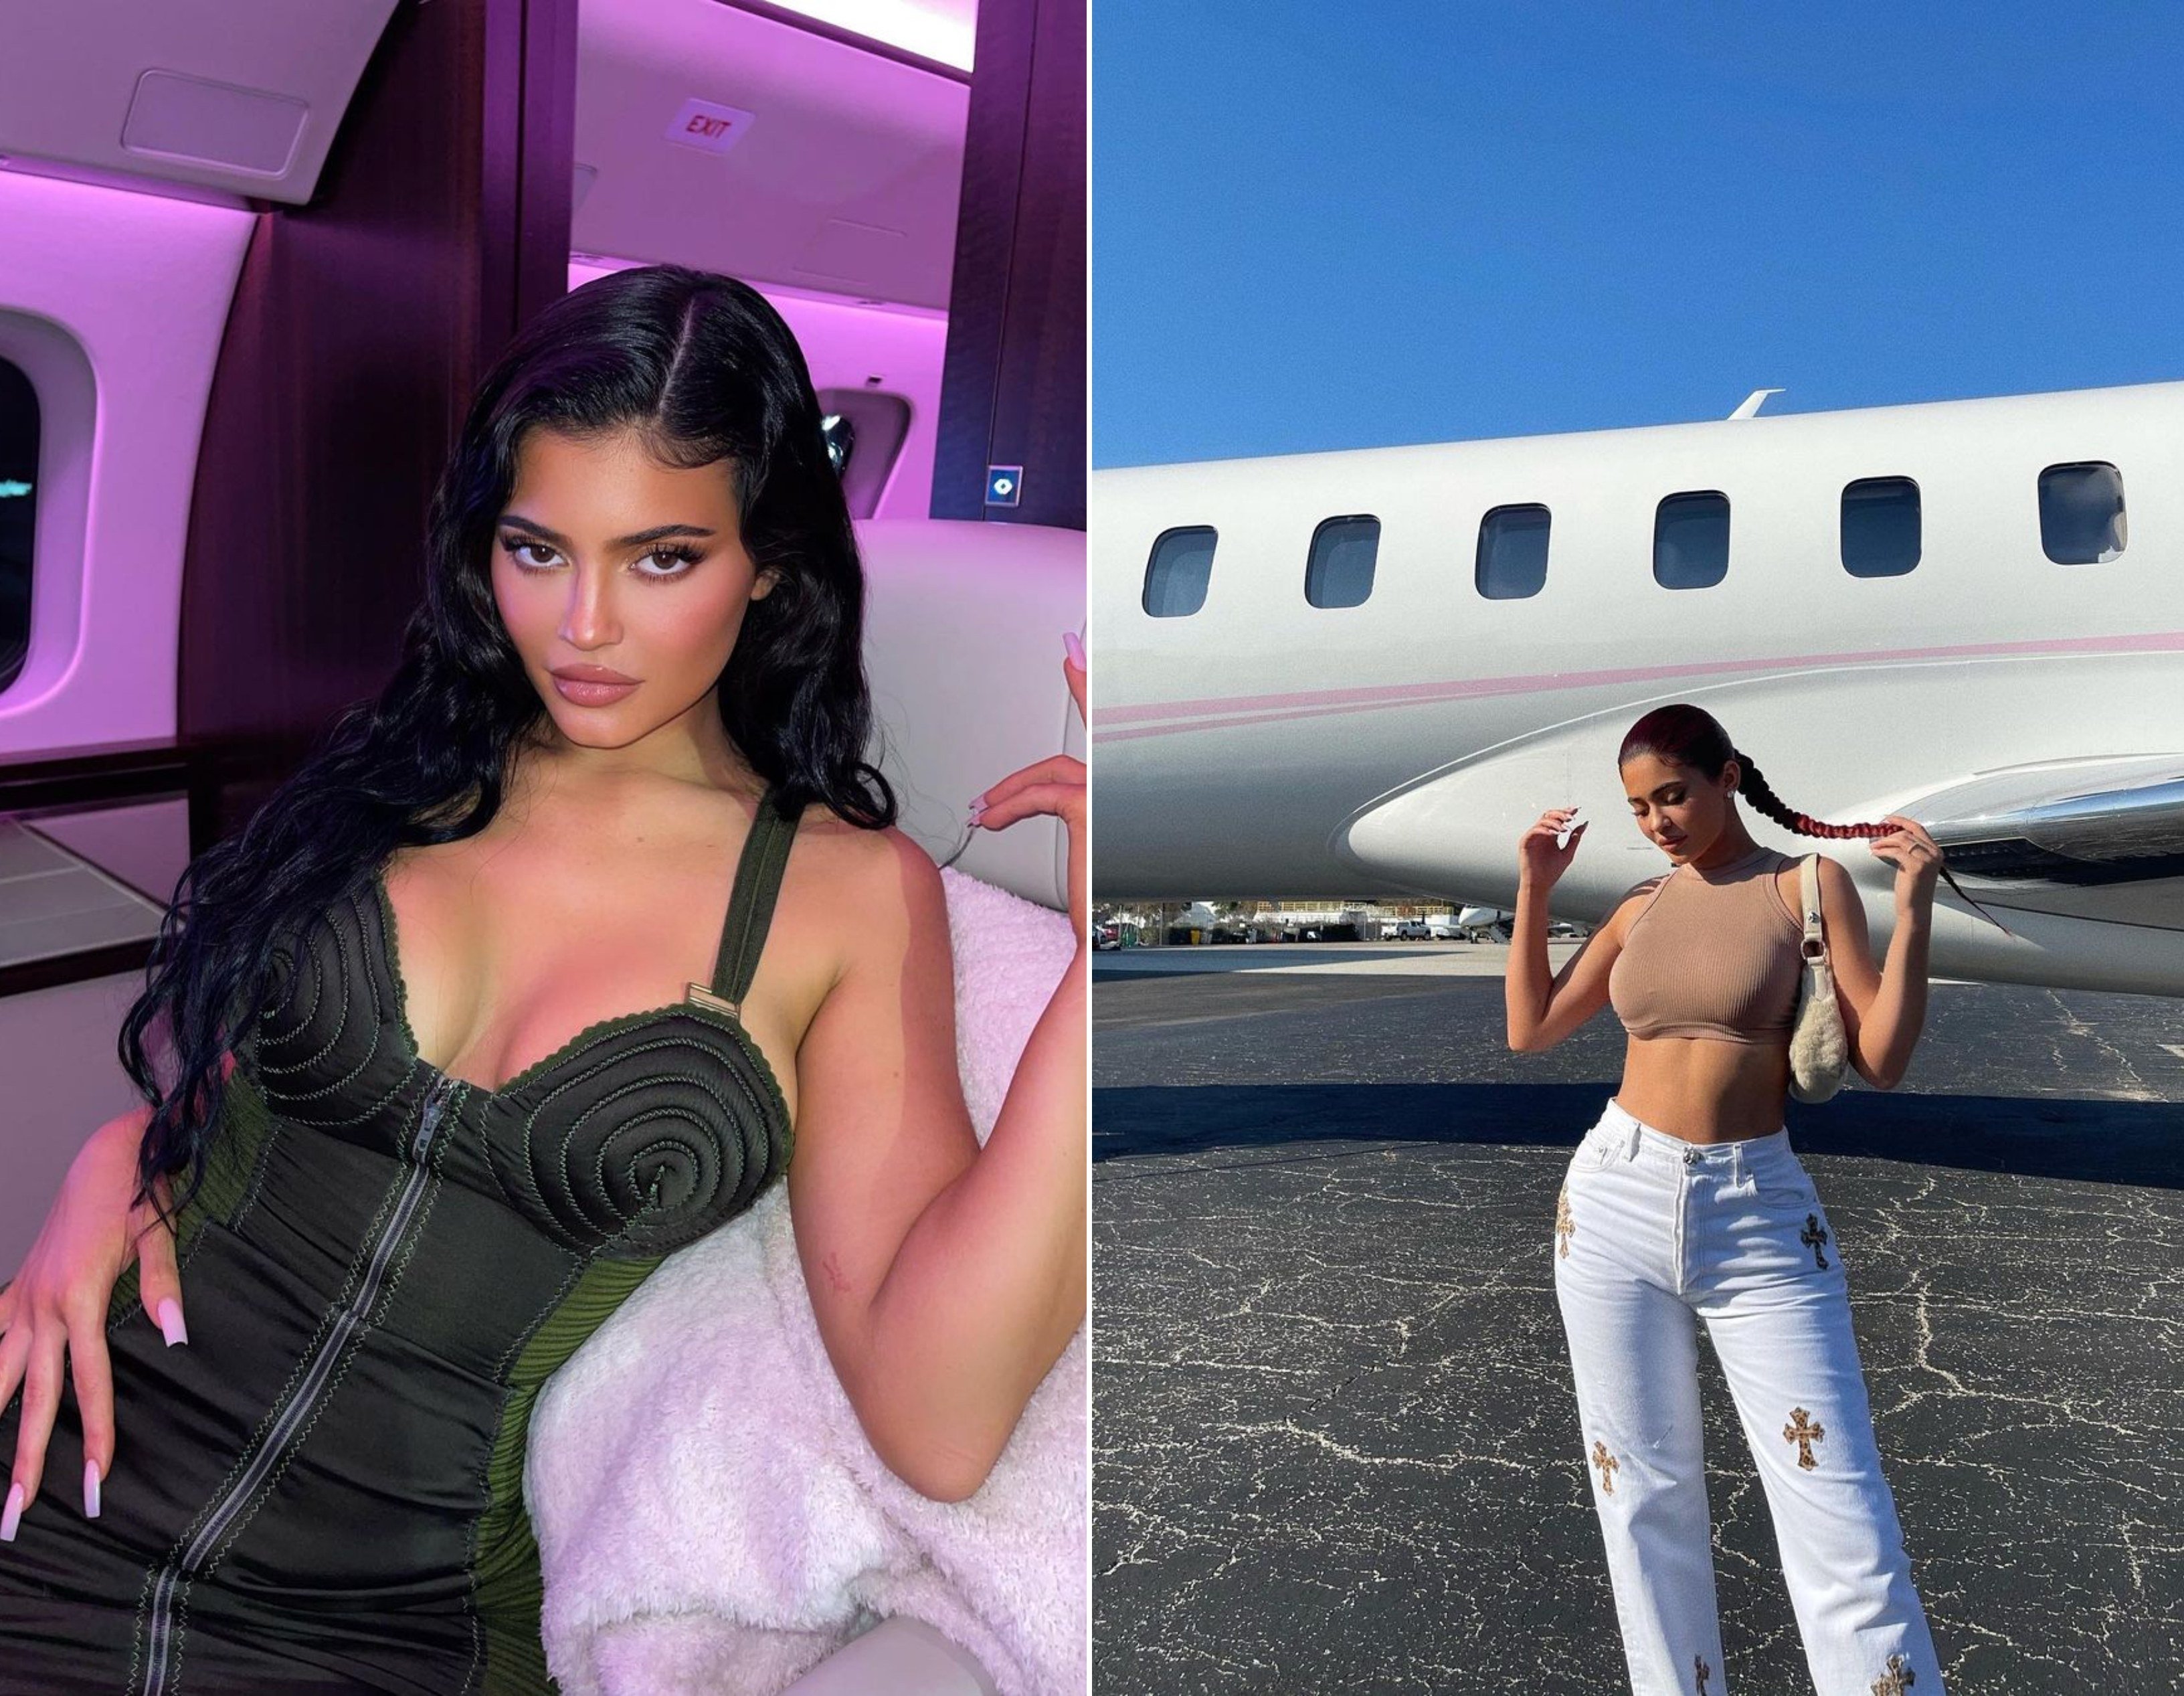 Kylie Jenner sure knows how to live the high life. Photos: @kyliejenner/Instagram

